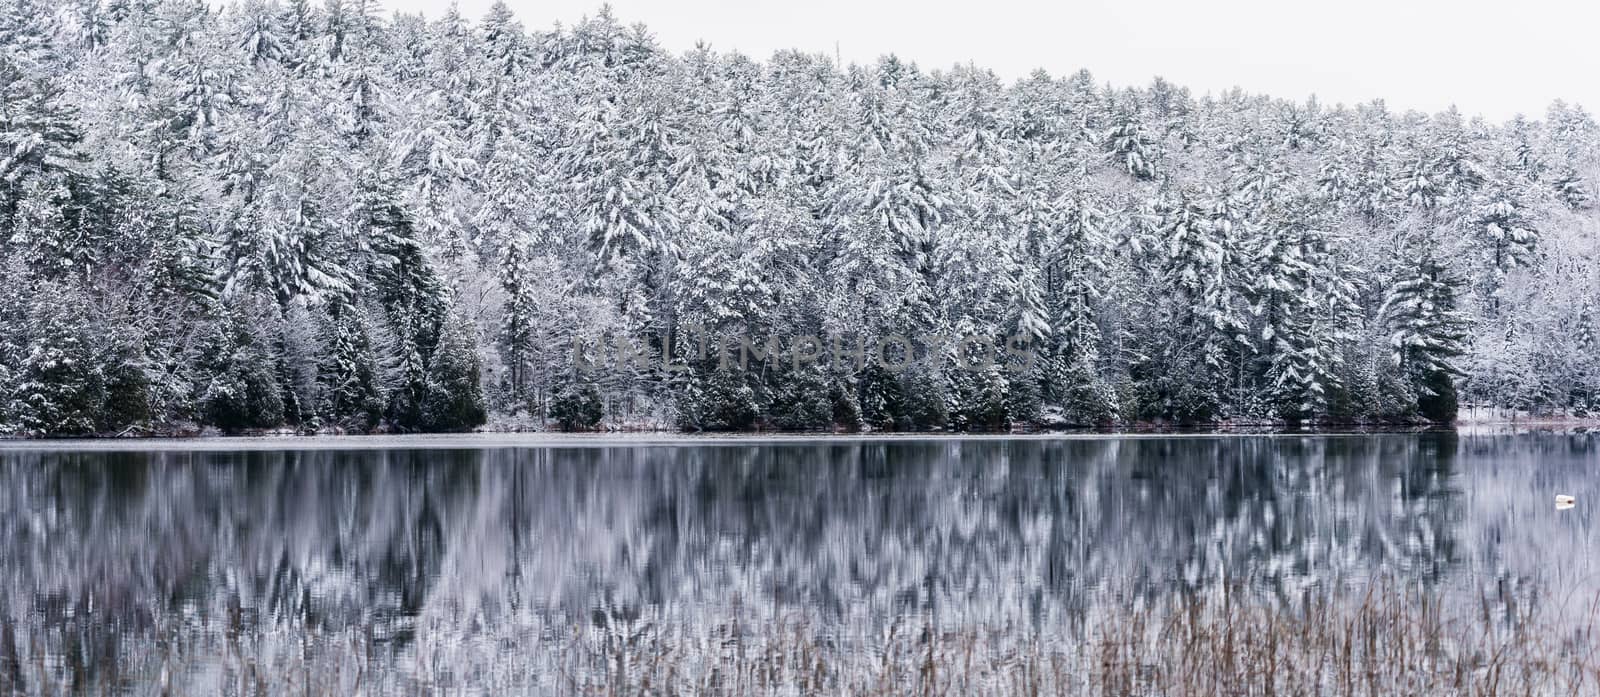 Winter forest reflections.  Mirage on a yet unfrozen lake. by valleyboi63